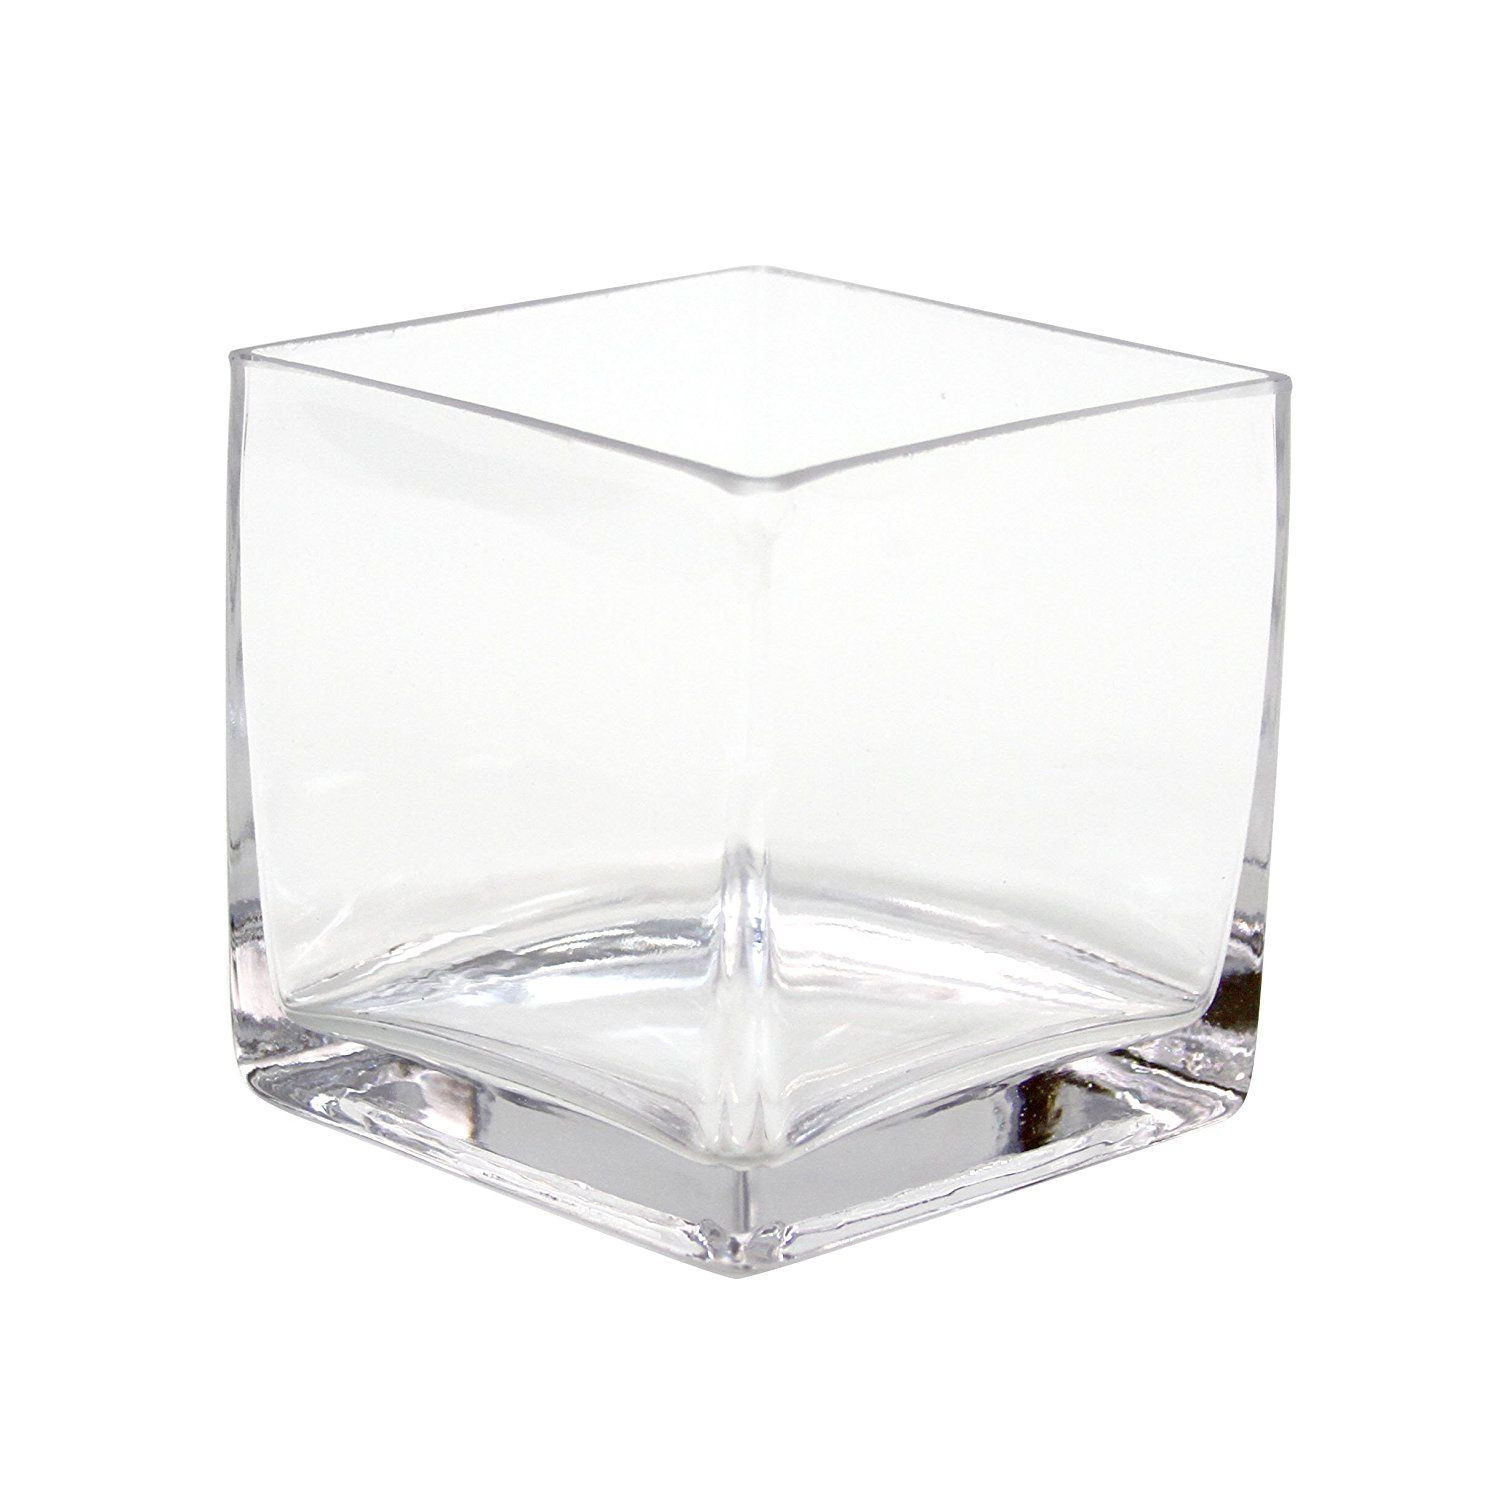 13 Stunning 6 X 6 Glass Cube Vases 2024 free download 6 x 6 glass cube vases of koyal wholesale 404343 12 pack cube square glass vases 4 by 4 by 4 within glass ac2b7 koyal wholesale 404343 12 pack cube square glass vases